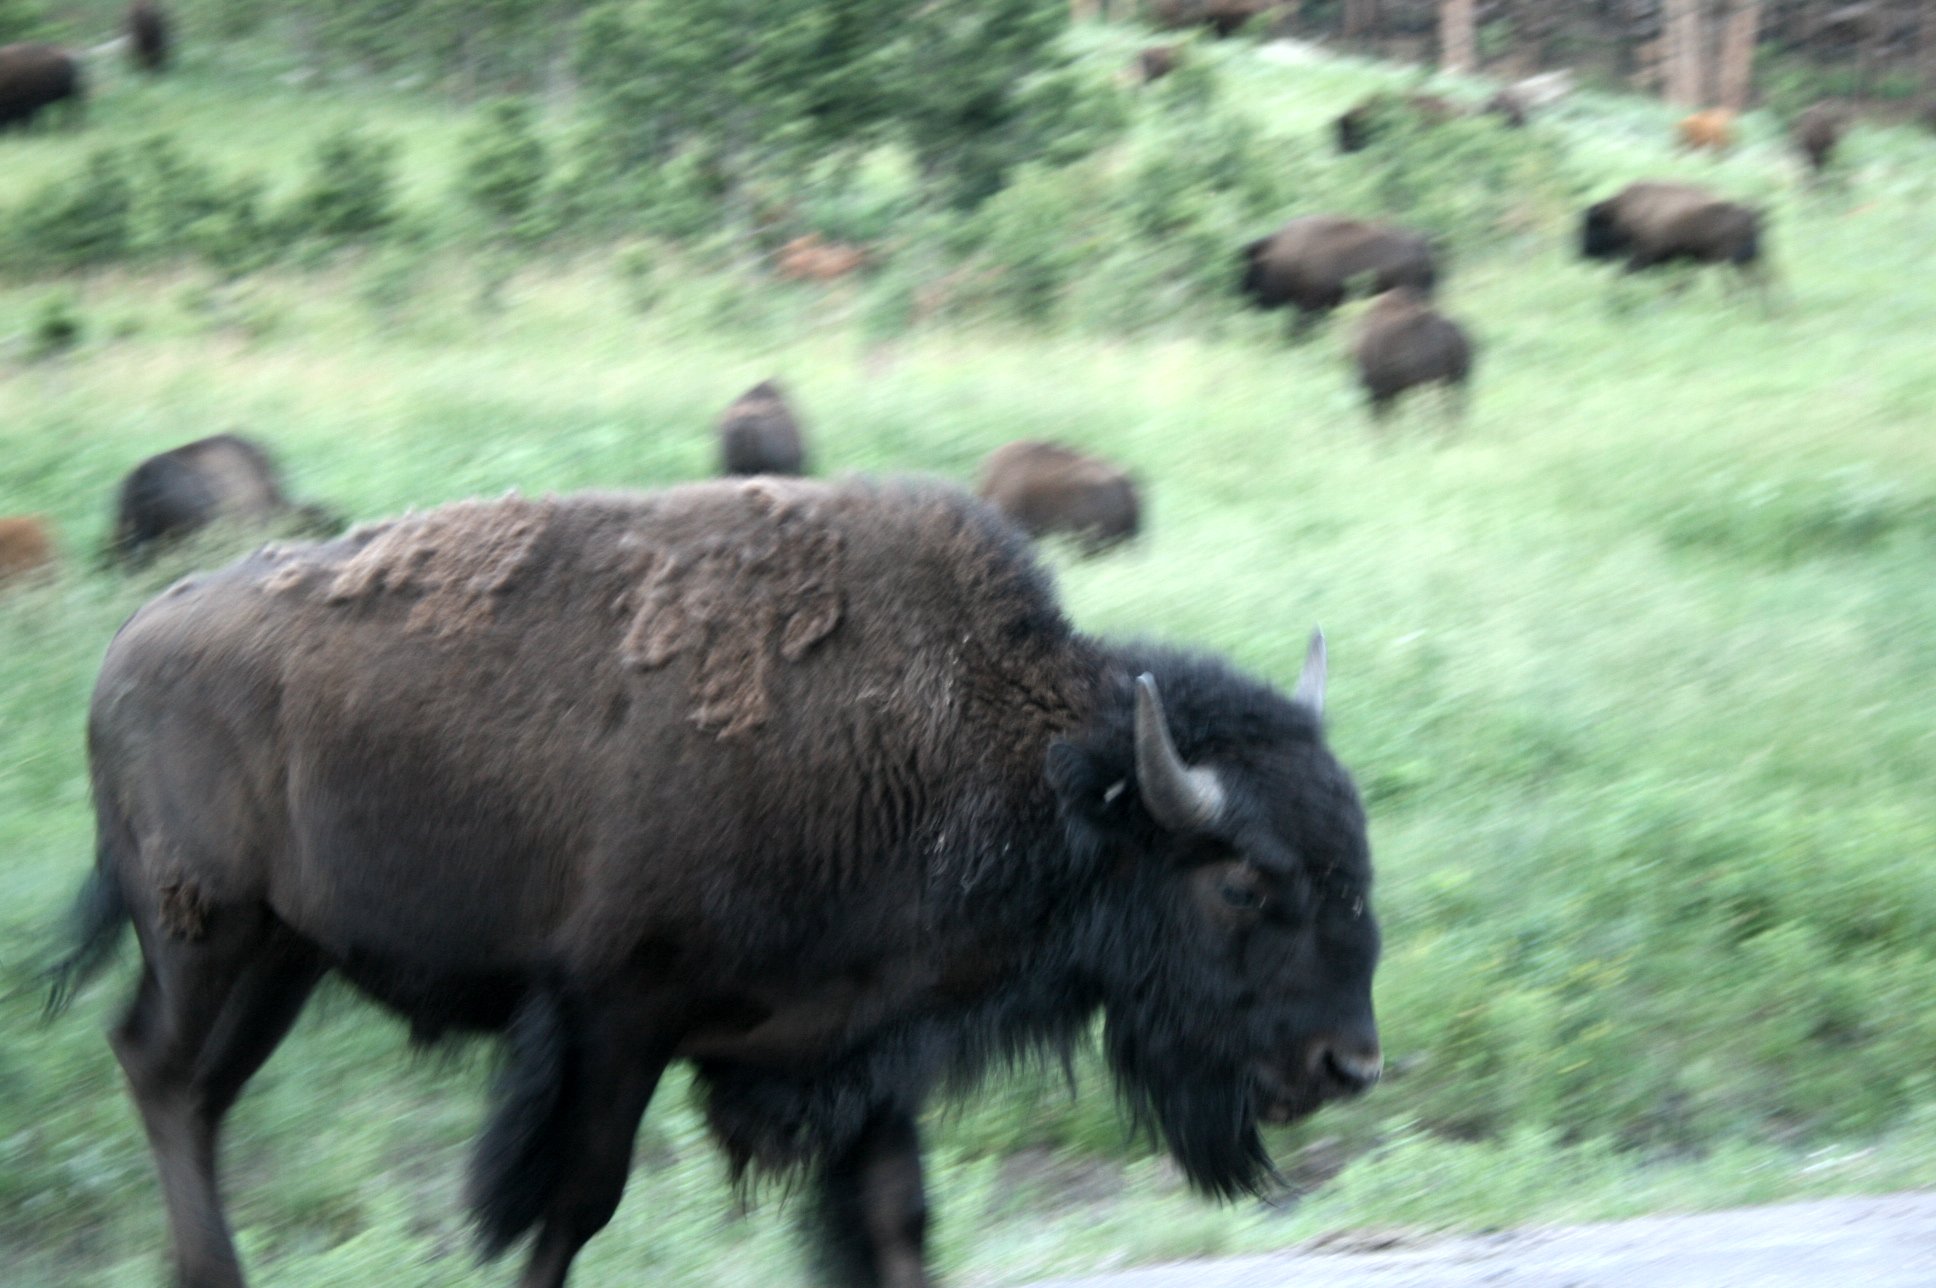 The Plains tribes gained virtually all their resources from the Buffalo herds - thinning out because of White hunting